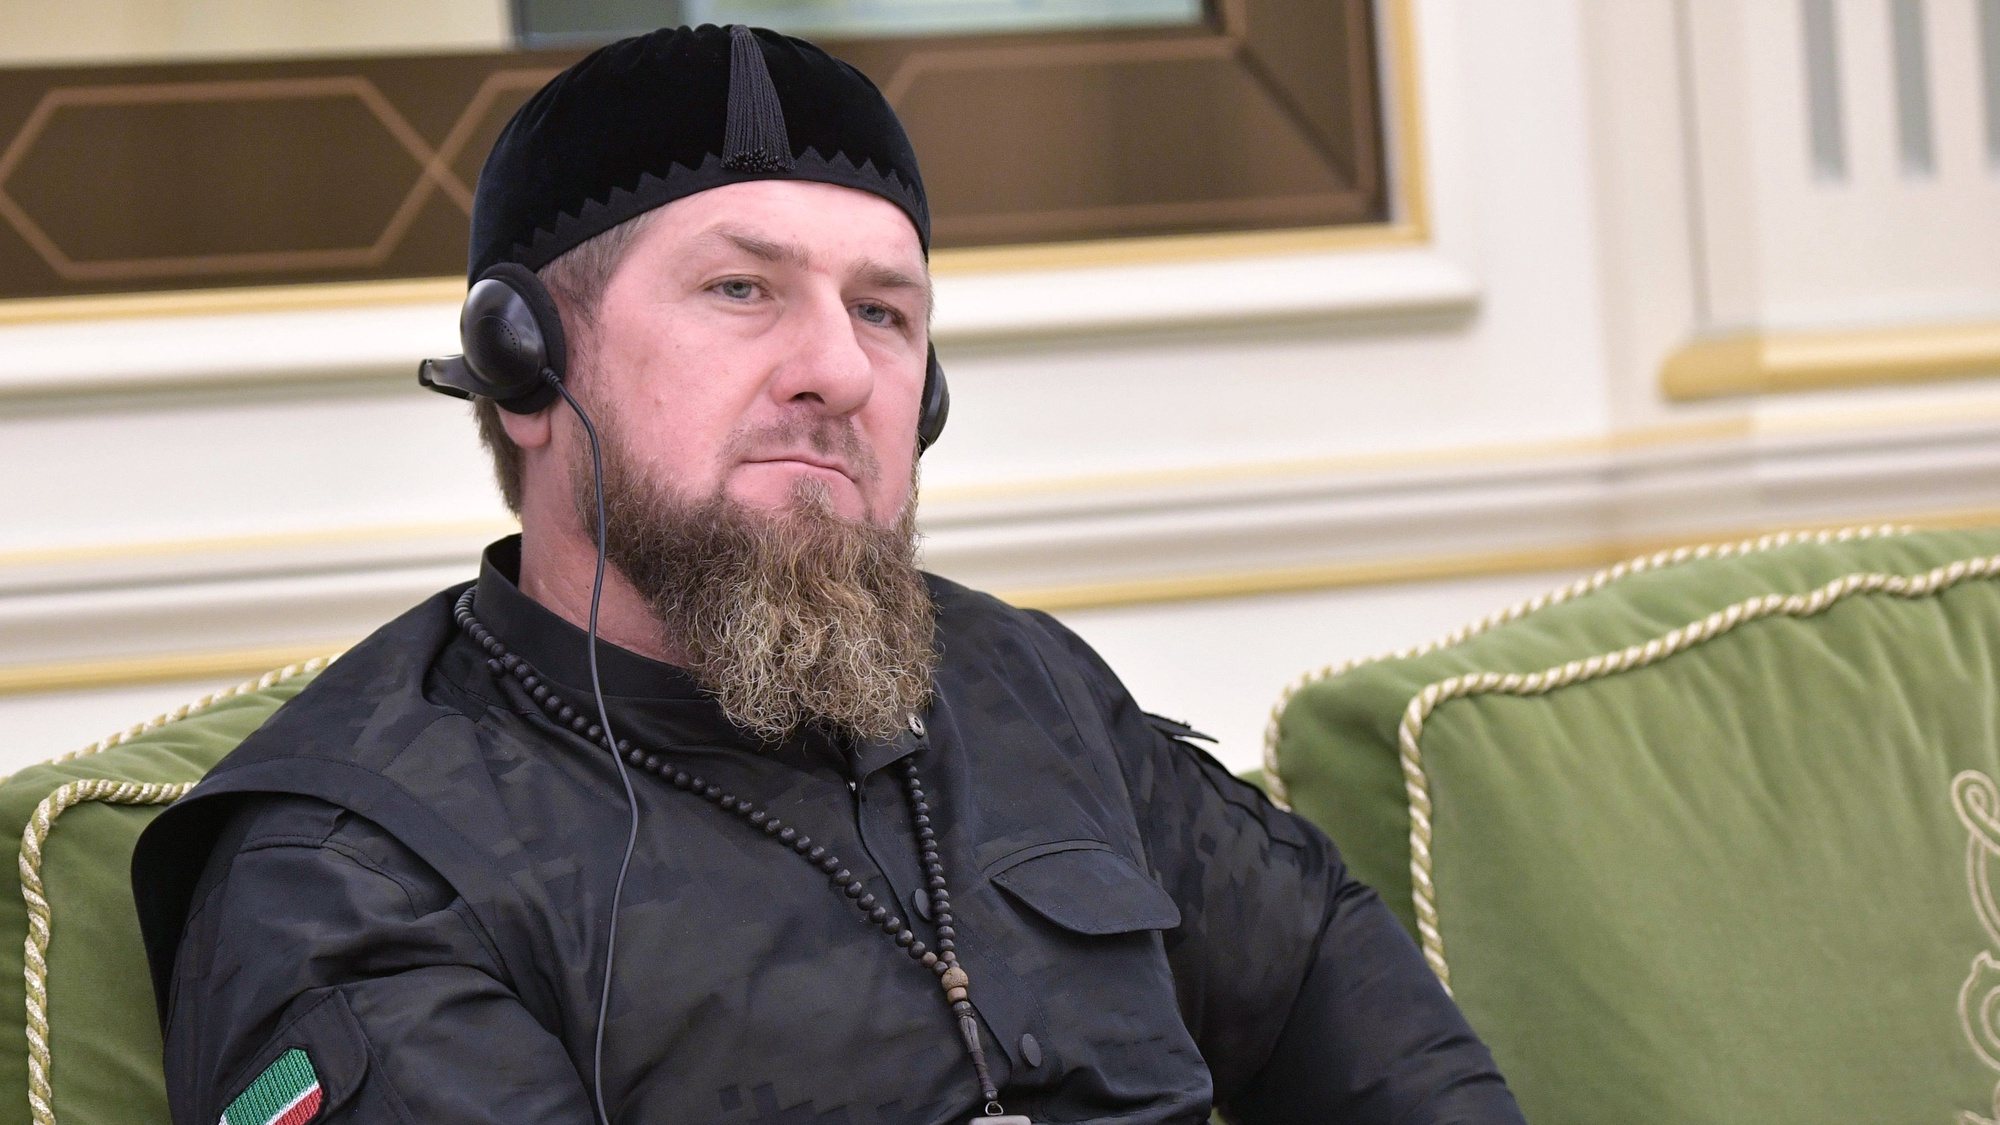 epa08436458 (FILE) Head of the Chechen Republic Ramzan Kadyrov attends a signing ceremony following Russian - Saudi Arabia&#039;s talks at the Saudi Royal palace in Riyadh, Saudi Arabia, 14 October 2019 (reissued 21 May 2020). According to media reports on 21 May 2020, Chechen leader Ramzan Kadyrov has flown to Moscow and is hospitalized with suspected coronavirus COVID-19 disease.  EPA/ALEXEY NIKOLSKY / SPUTNIK / KREMLIN POOL MANDATORY CREDIT *** Local Caption *** 55547761